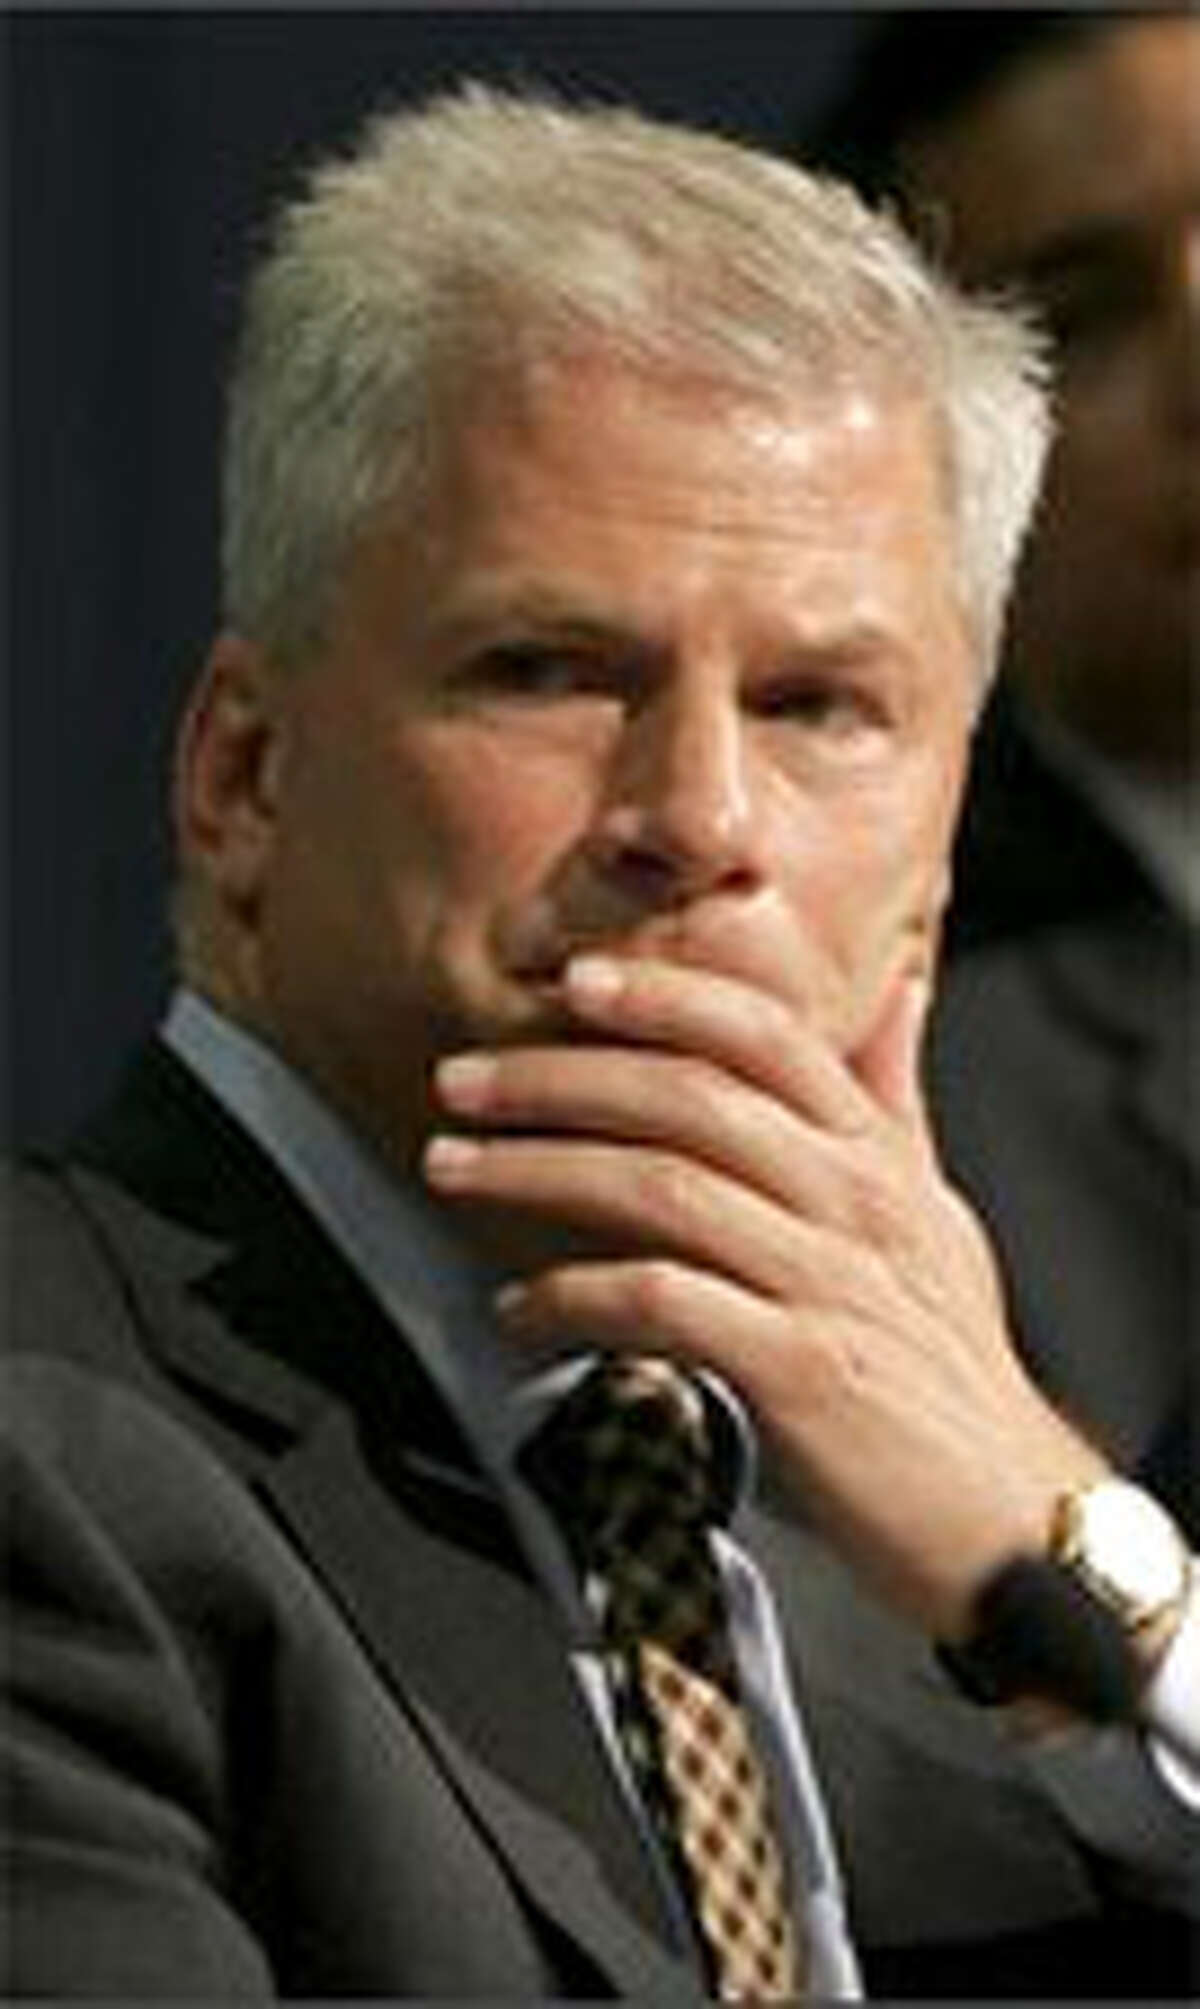 Former U.S. Attorney for Western Washington John McKay. He prosecuted the Millennial Bomber, earned high performance reviews, but was fired by the Bush administration for his independence. 